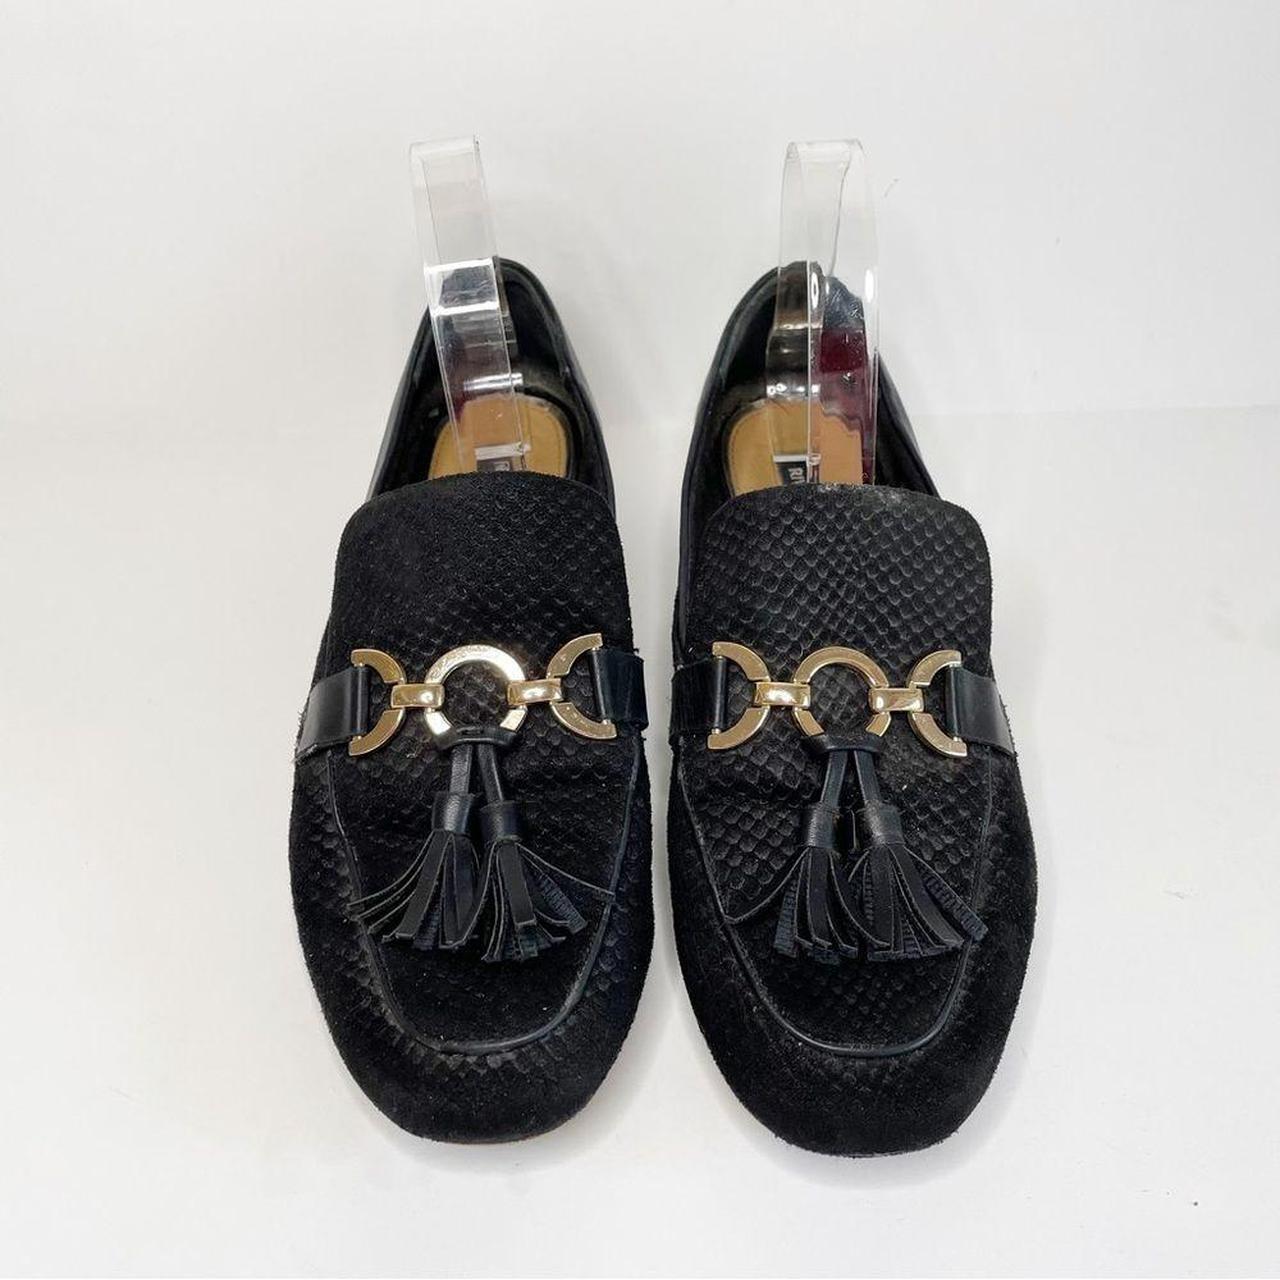 River Island Women's Black and Gold Loafers (2)